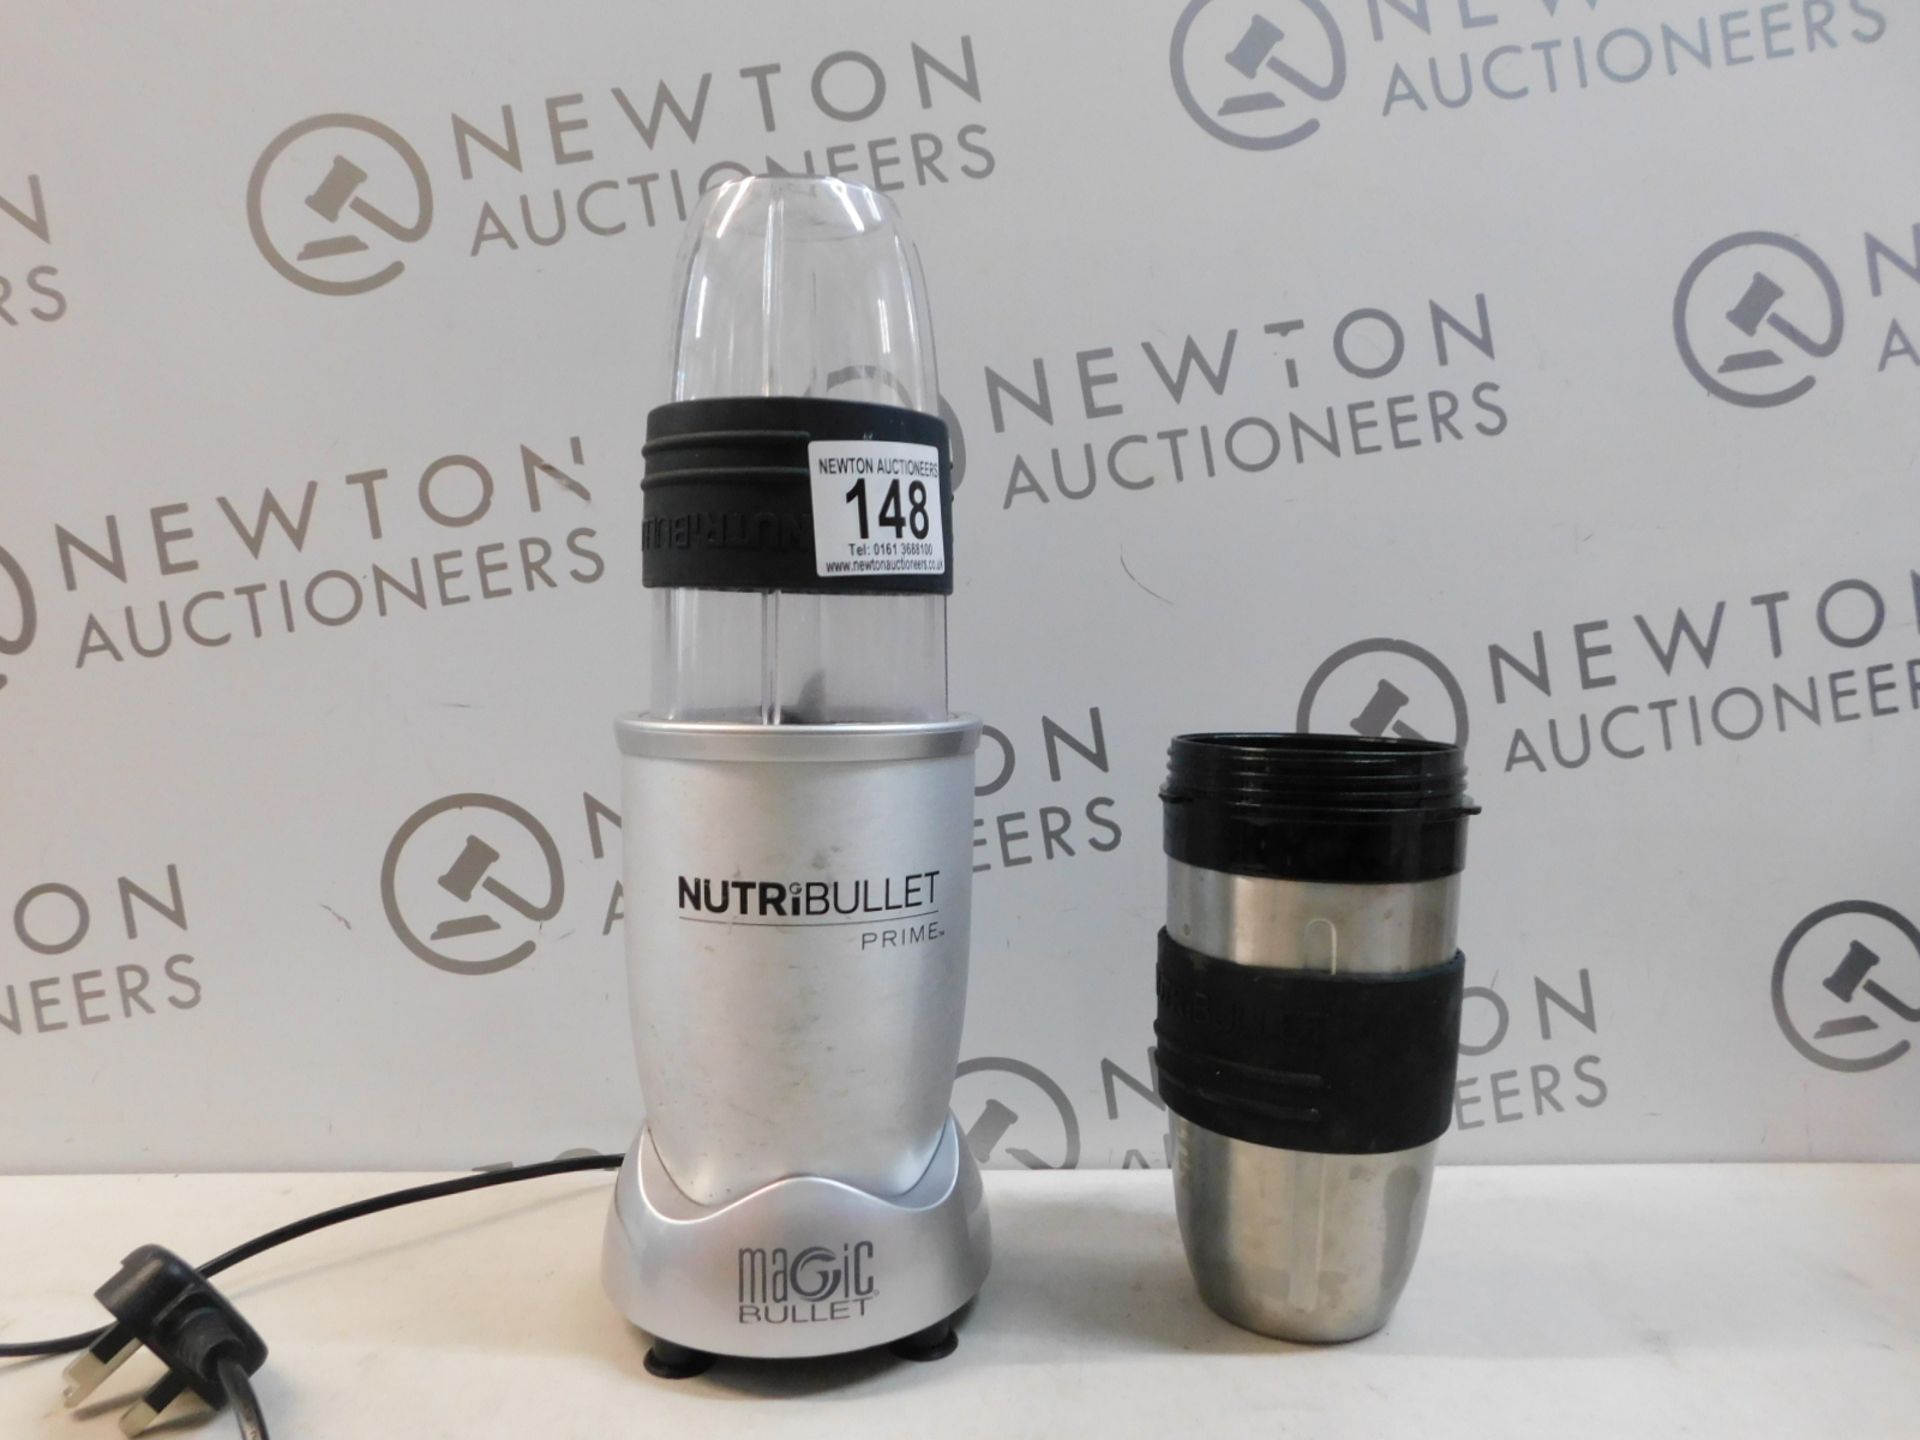 1 NUTRIBULLET PRIME BLENDER/ MIXER WITH ACCESSORIES RRP Â£119.99 - Image 2 of 2